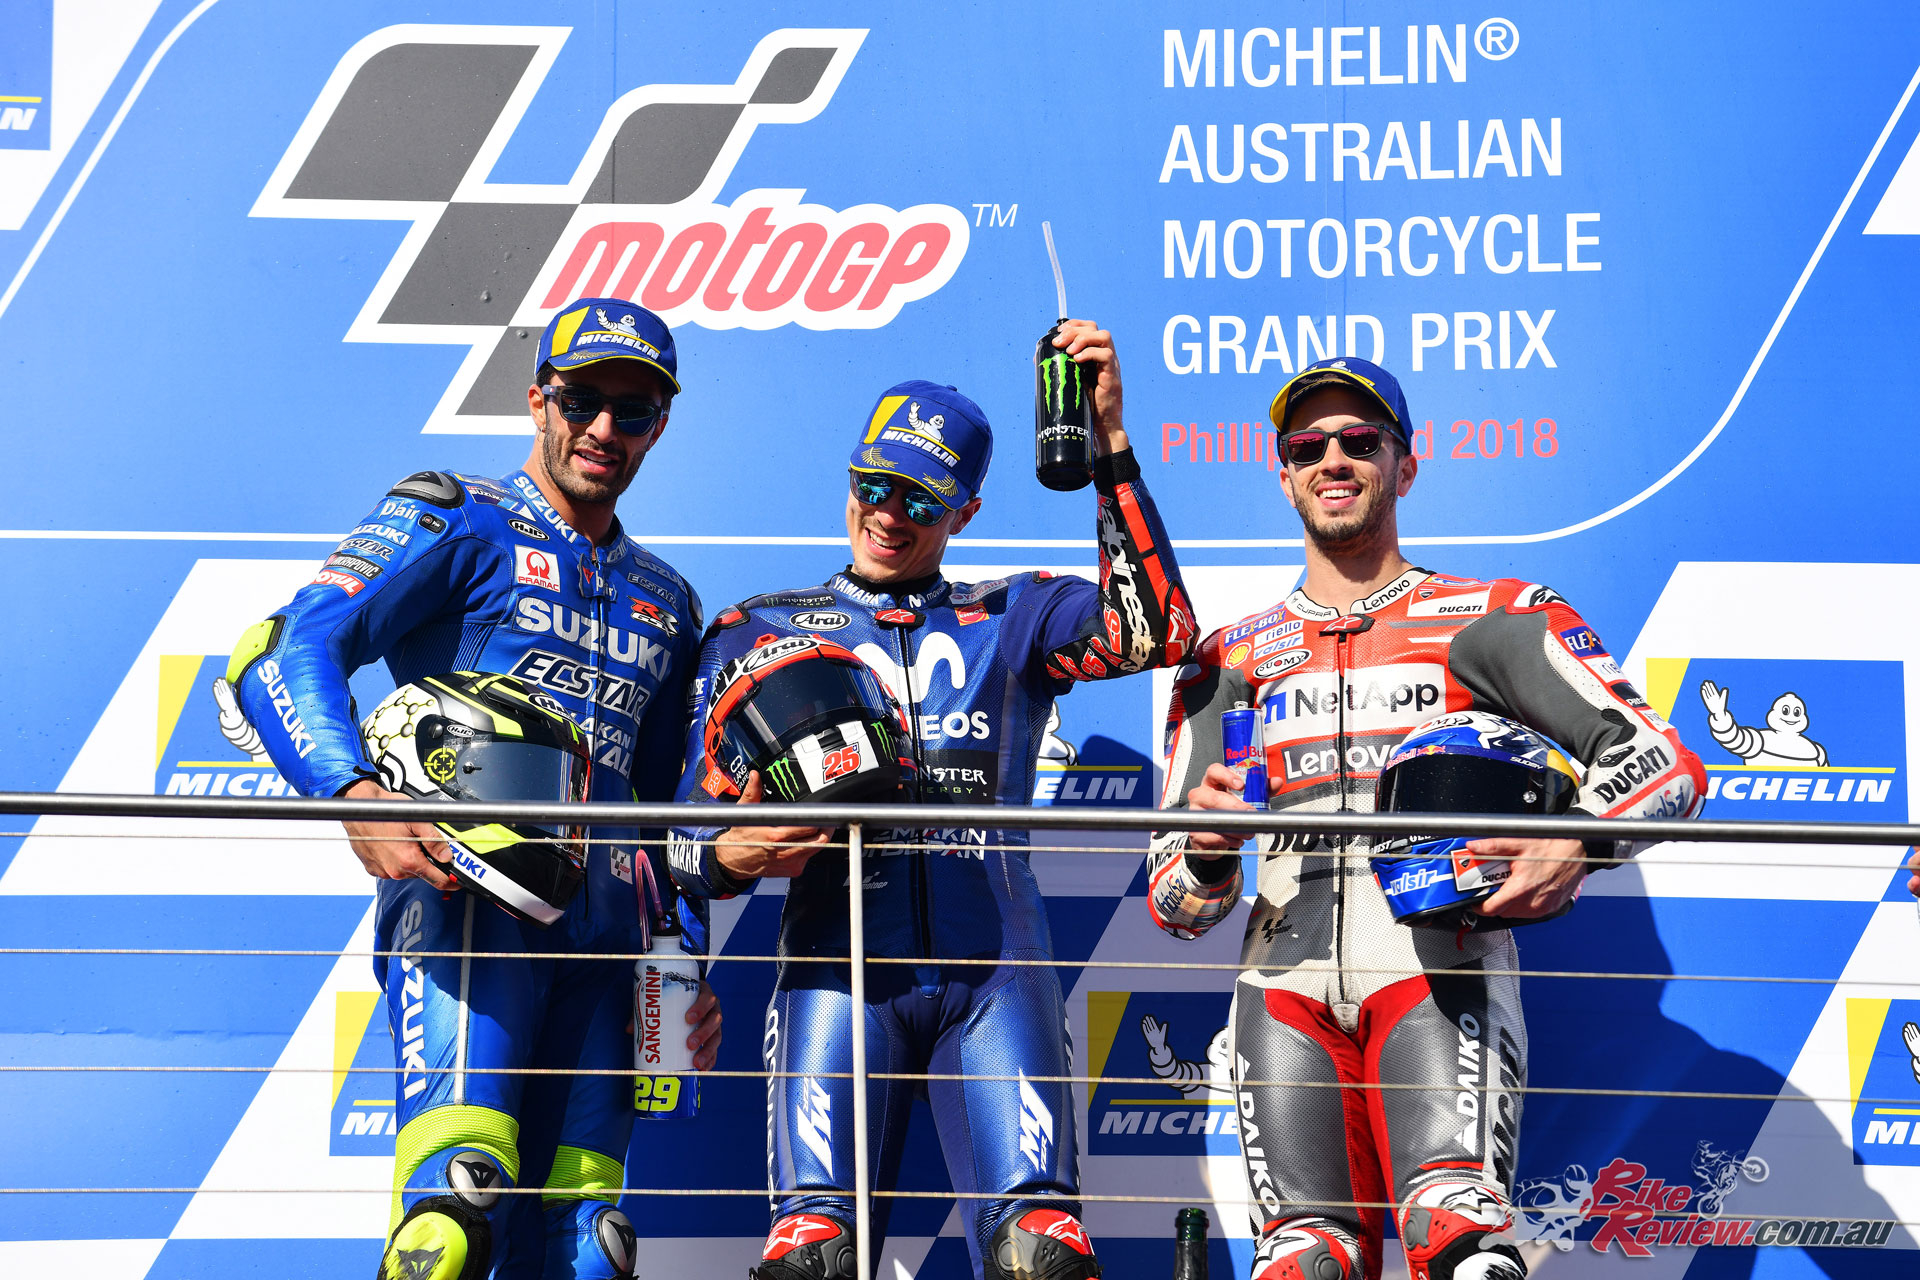 Maverick Vinales claims the win from Iannone and Dovizioso